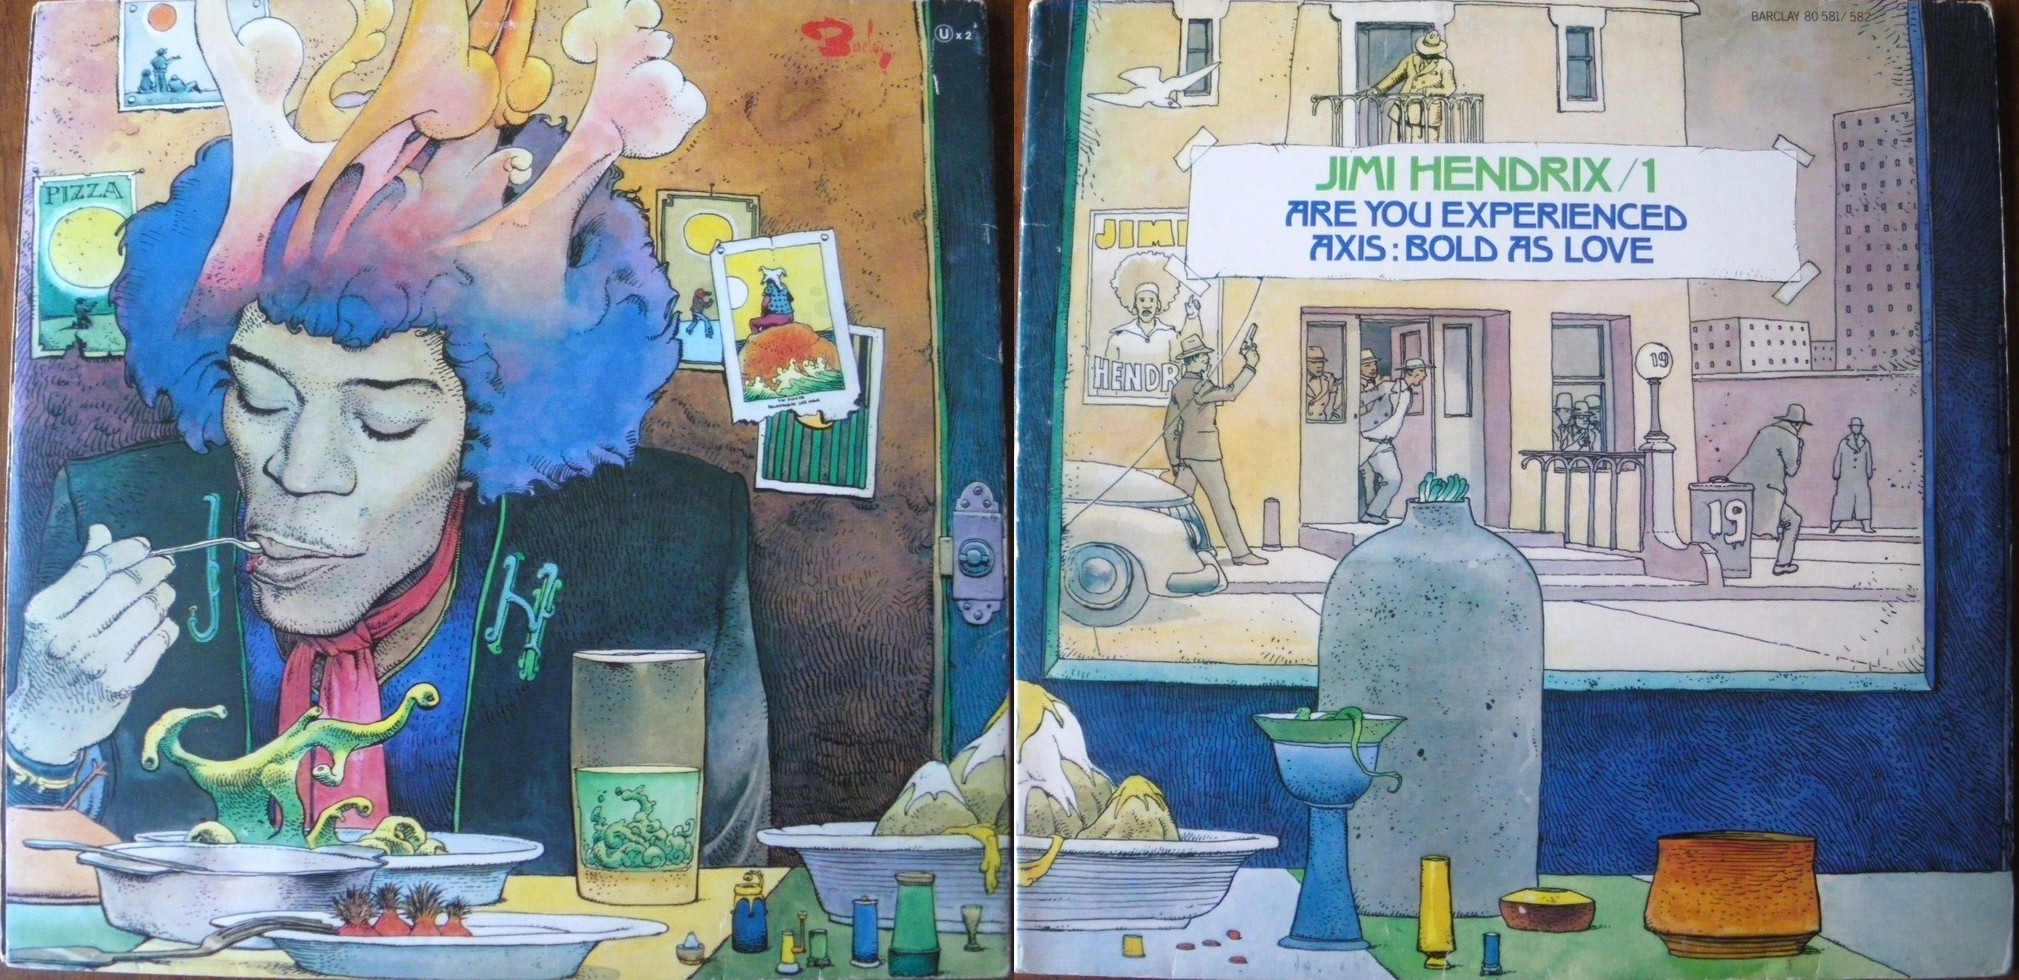 Jimi Hendrix ‎– Are You Experienced / Axis : Bold As Love, Dessin Moebius, 1975 © Barclay